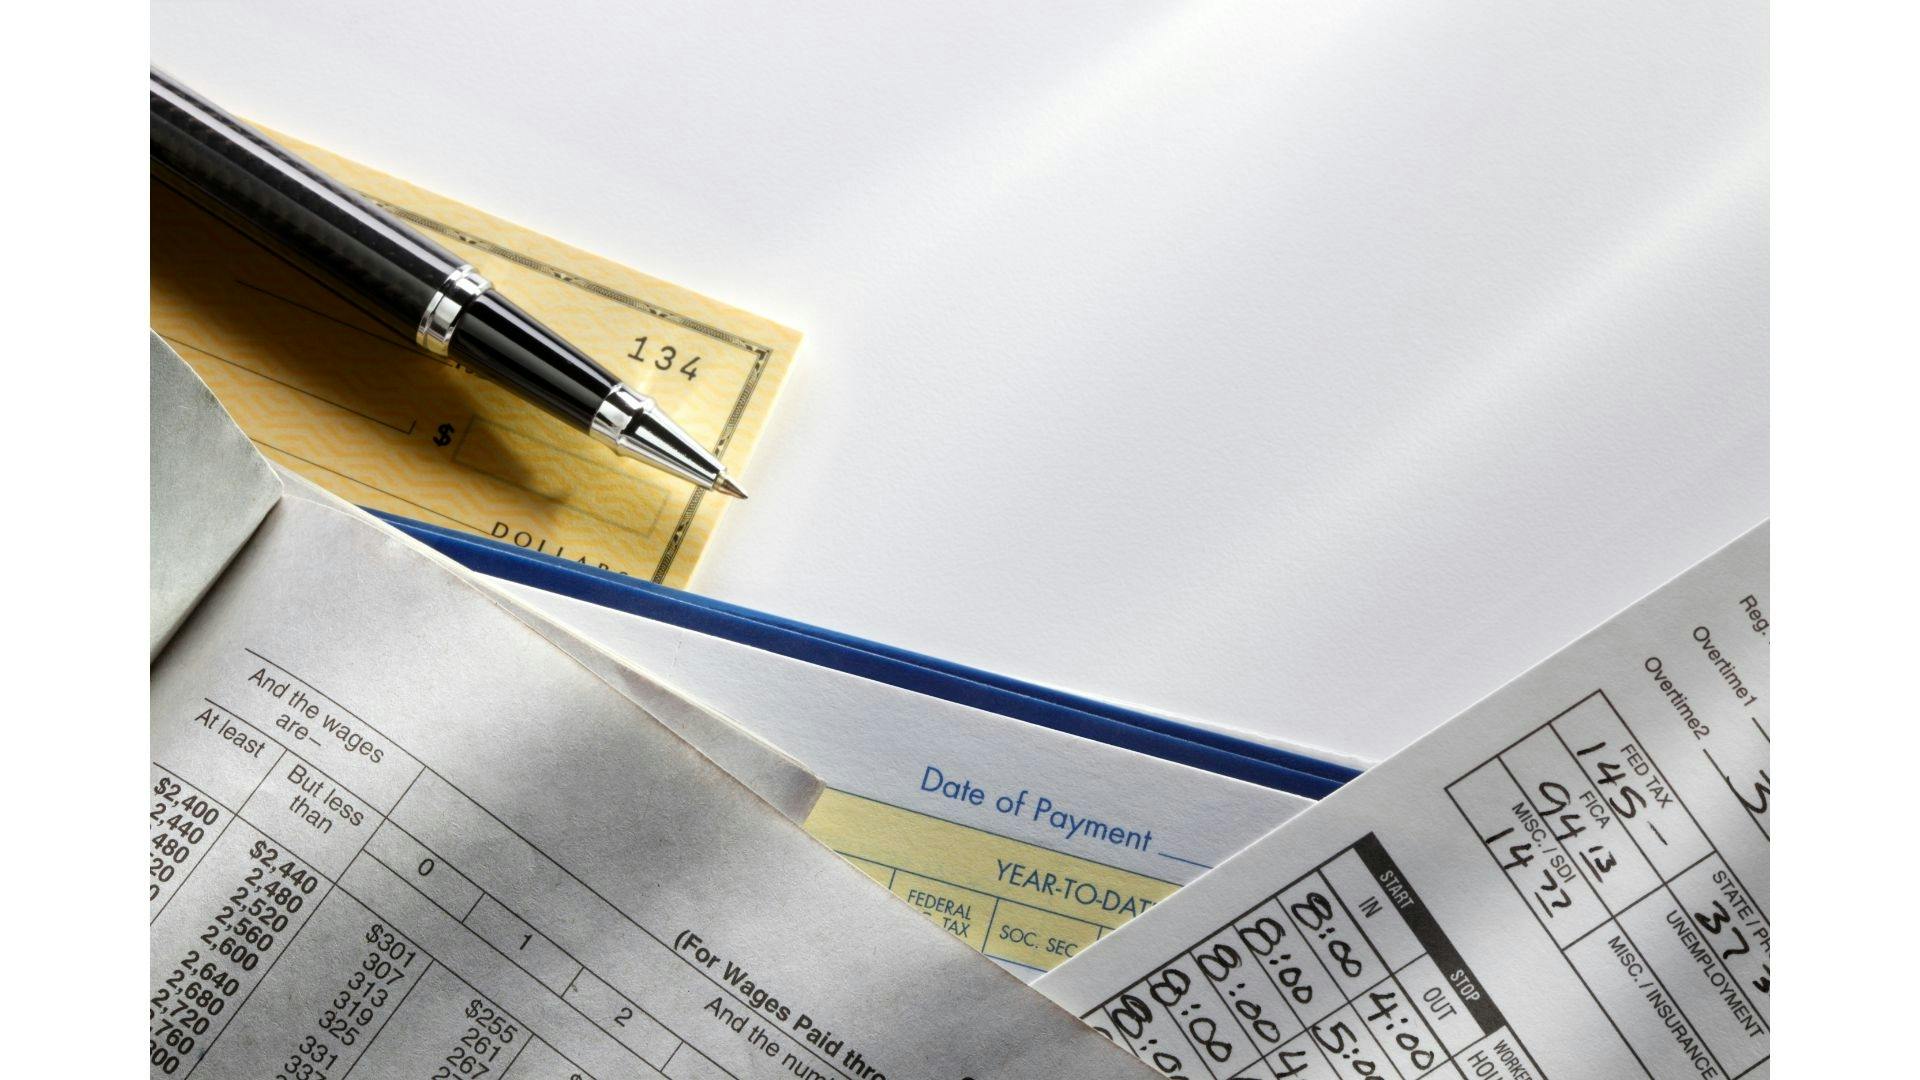 Payroll forms